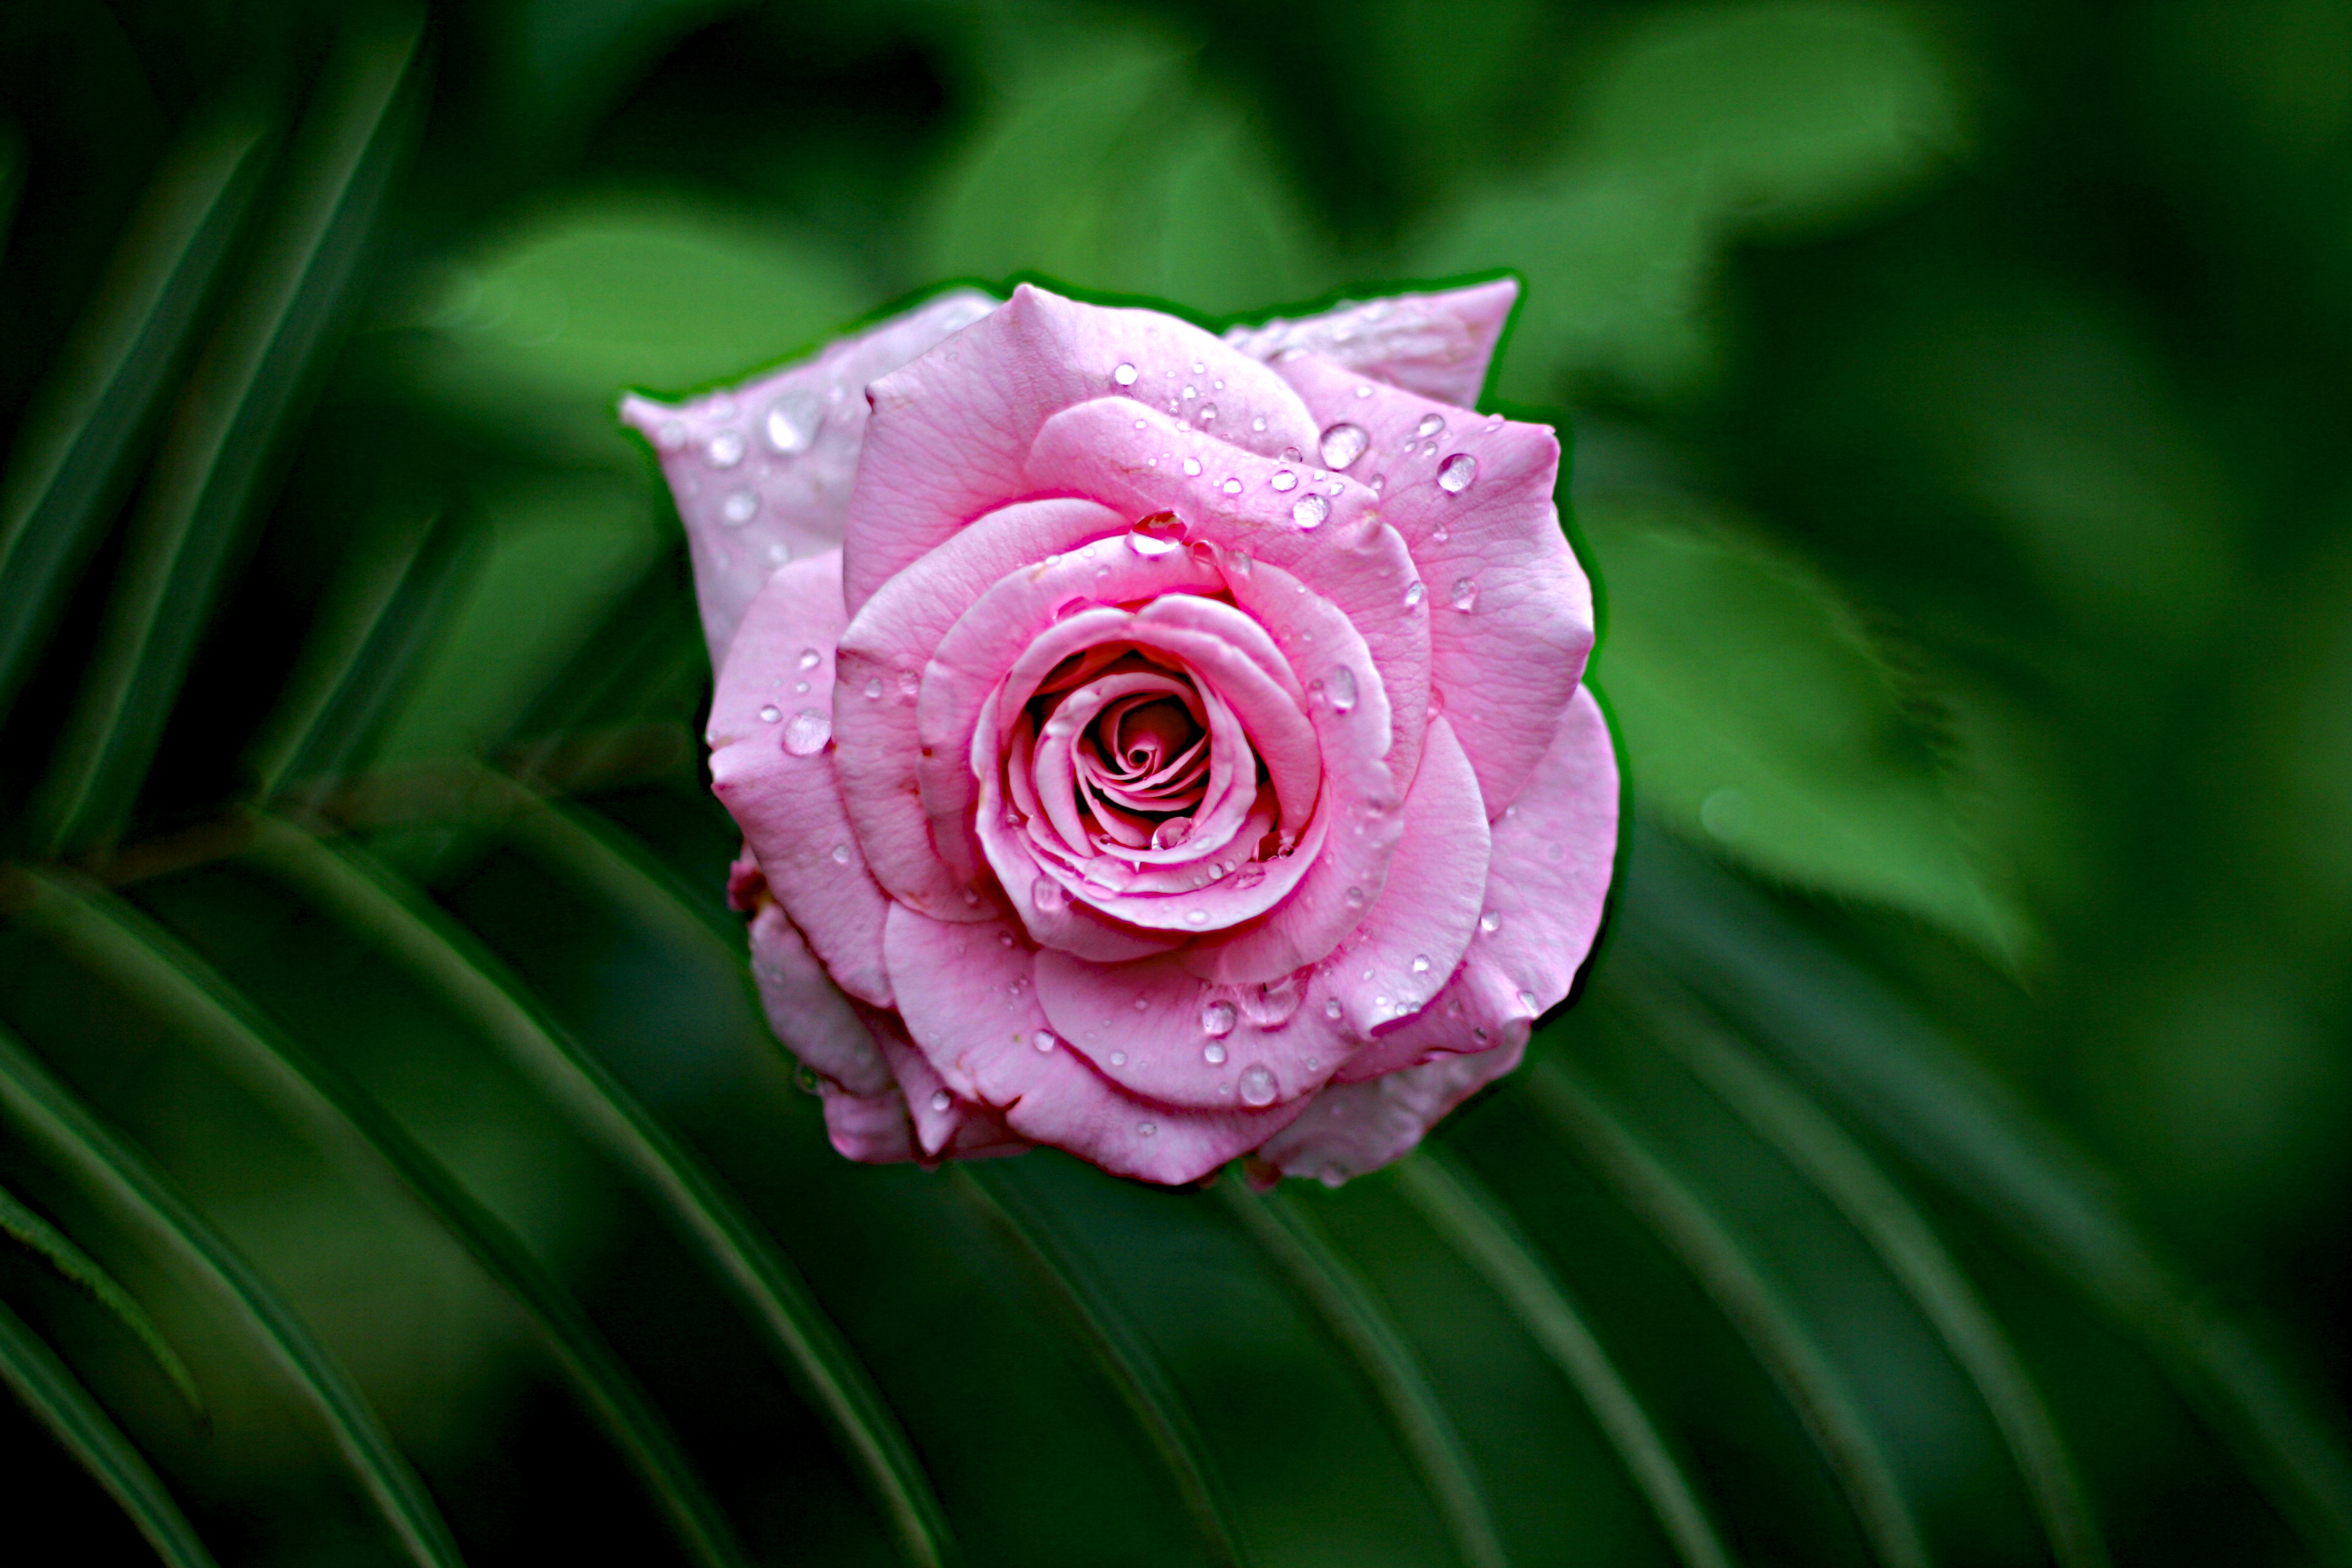 close up, rose flower, wet, drops, flowers, leaves, pink, rose, dew, to dissolve, blossom images